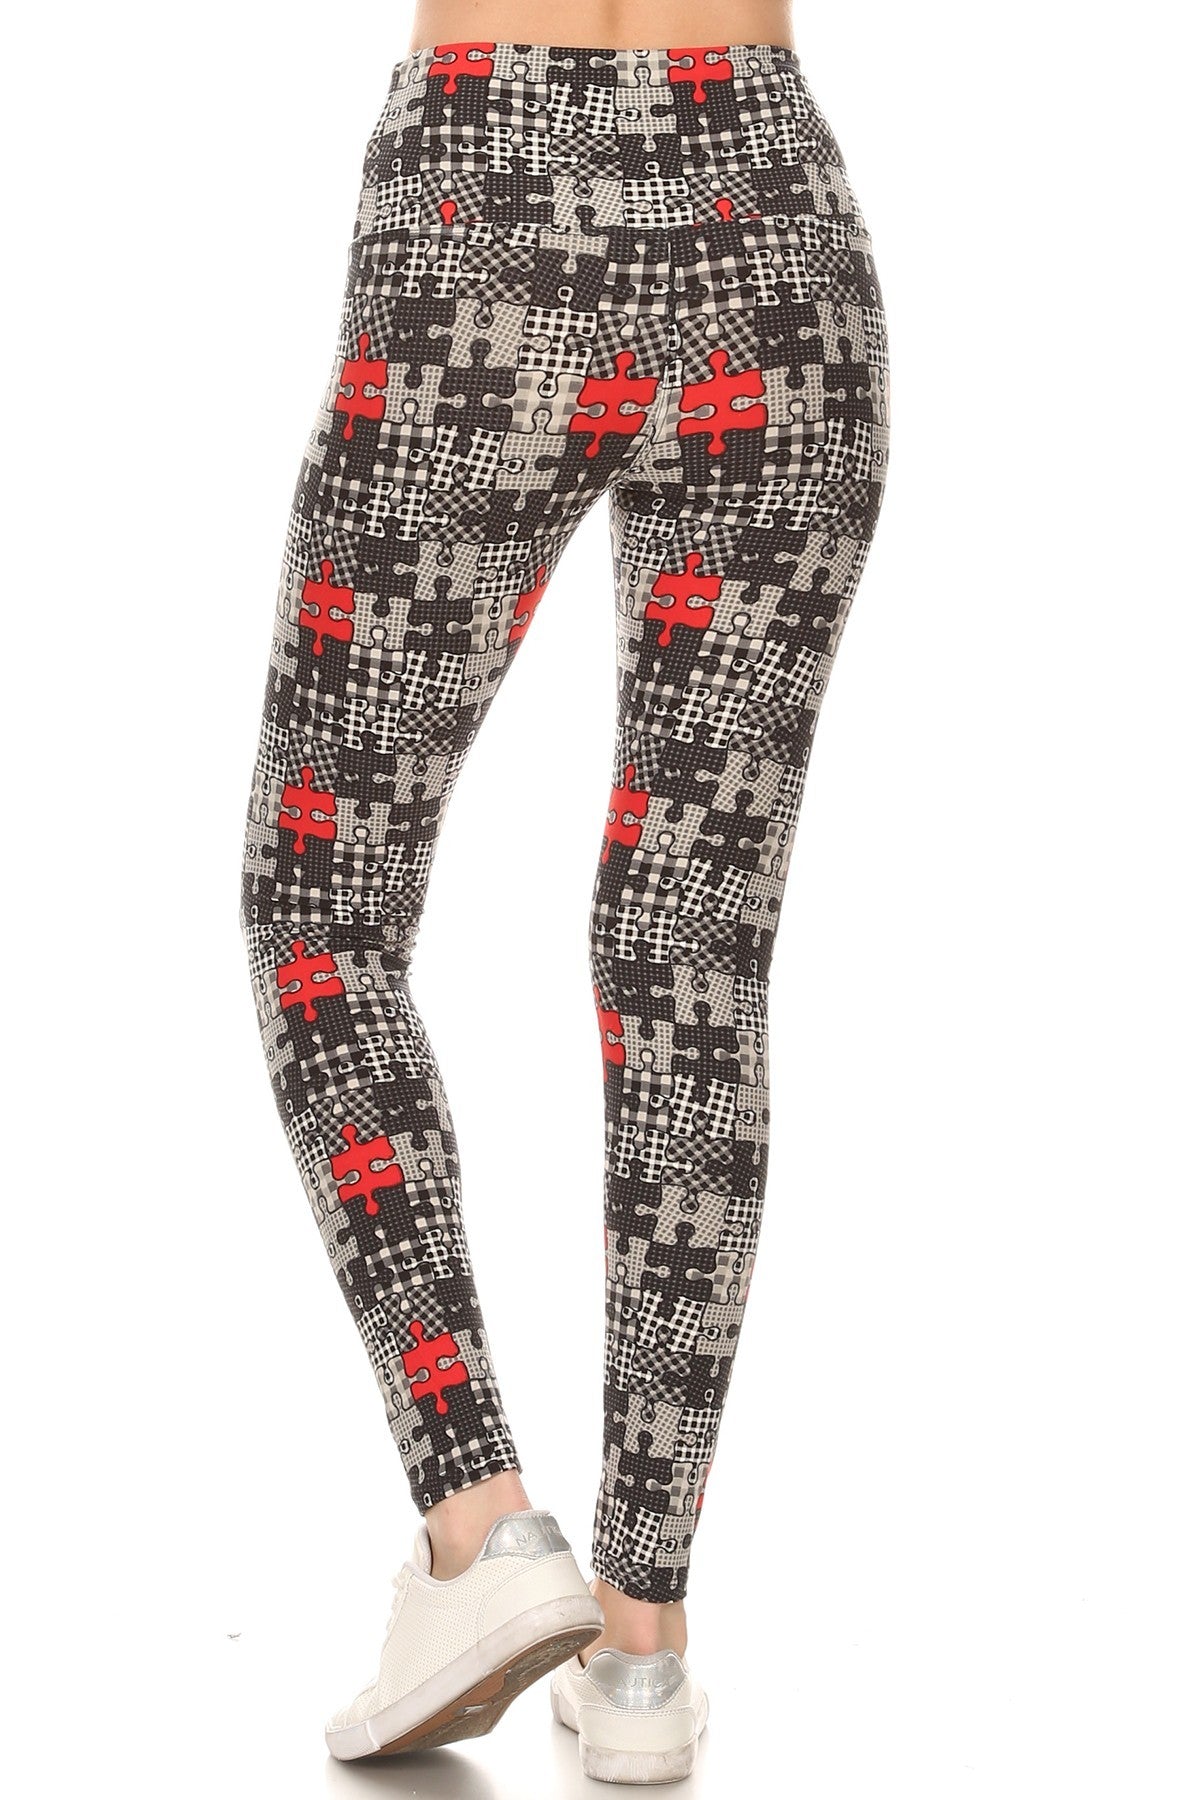 5-inch Long Yoga Style Banded Lined Puzzle Printed Knit Legging With High Waist Smile Sparker